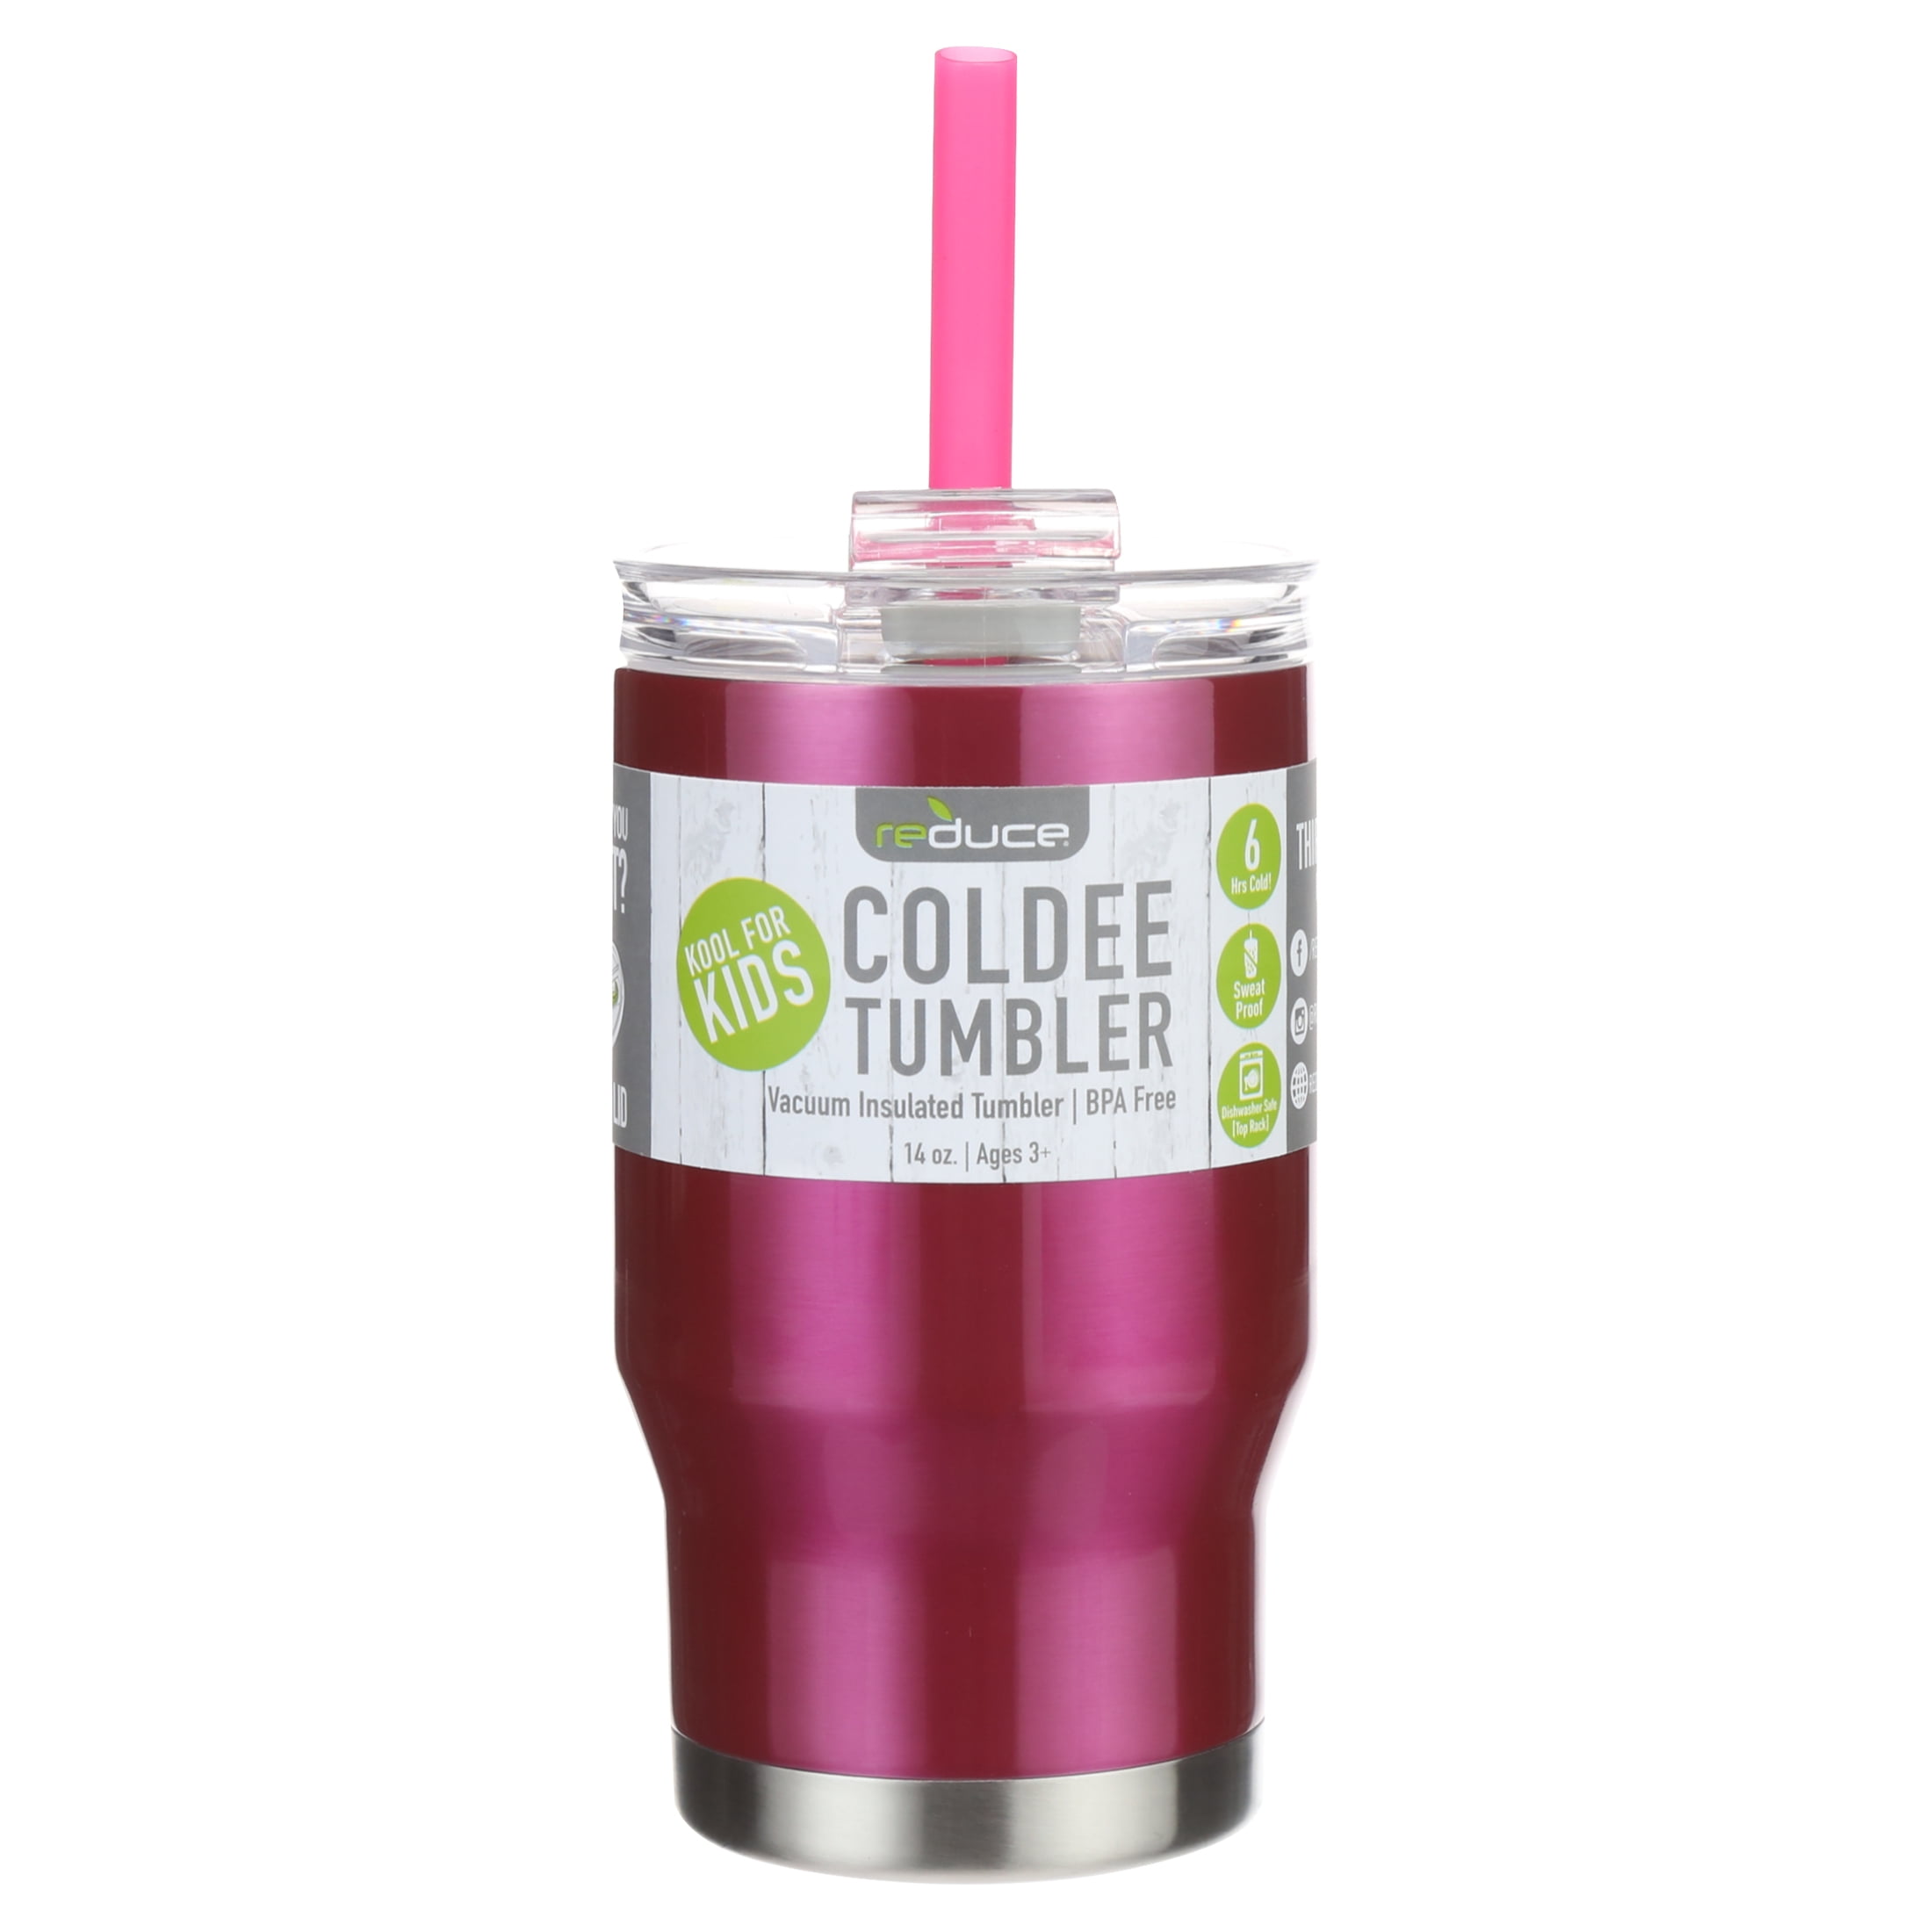  Reduce Stainless Steel Tumblers from $7.99 - Kids Activities, Saving Money, Home Management